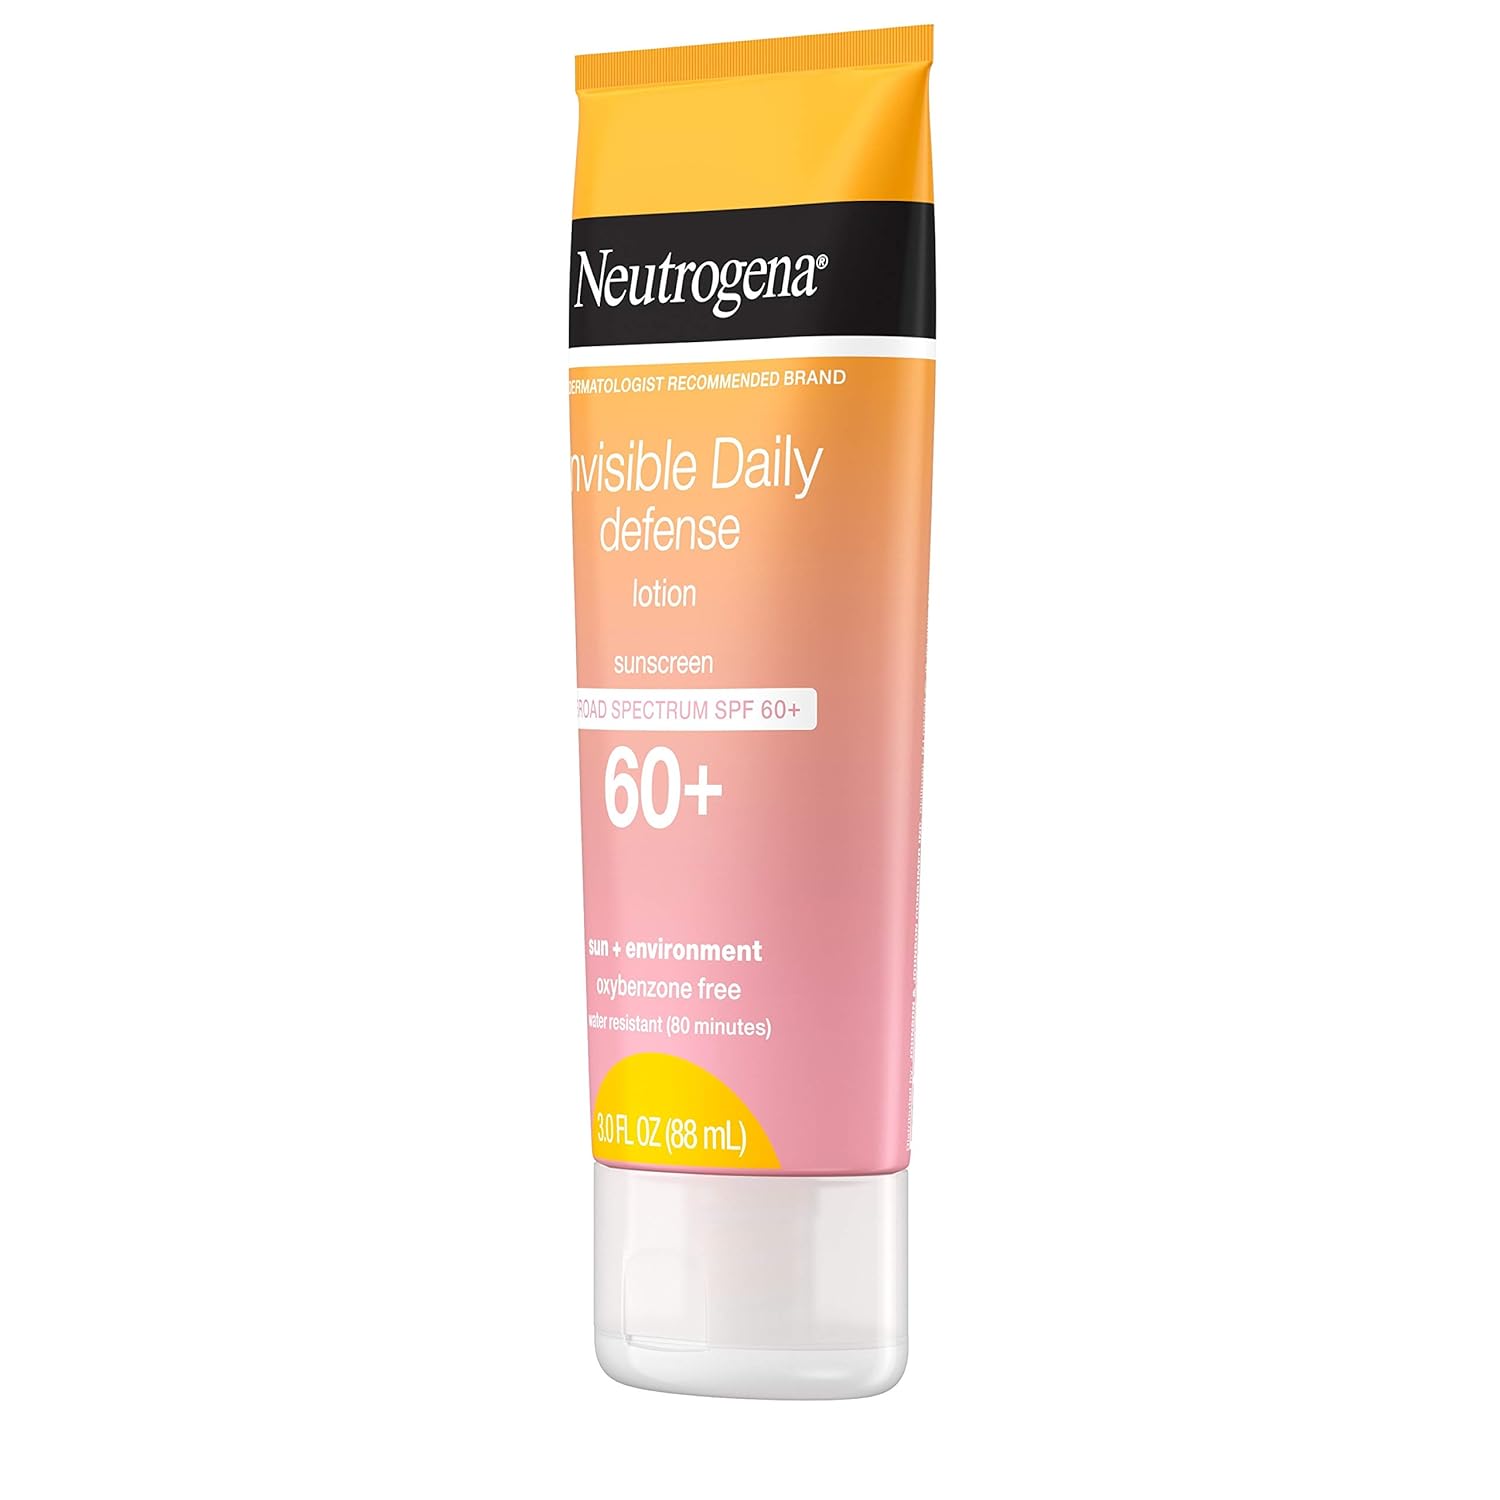 Neutrogena Invisible Daily Sunscreen Lotion, Broad Spectrum SPF 60+, Oxybenzone-Free & Water-Resistant, Sun or Environmental Aggressor Protection, Antioxidant : Beauty & Personal Care